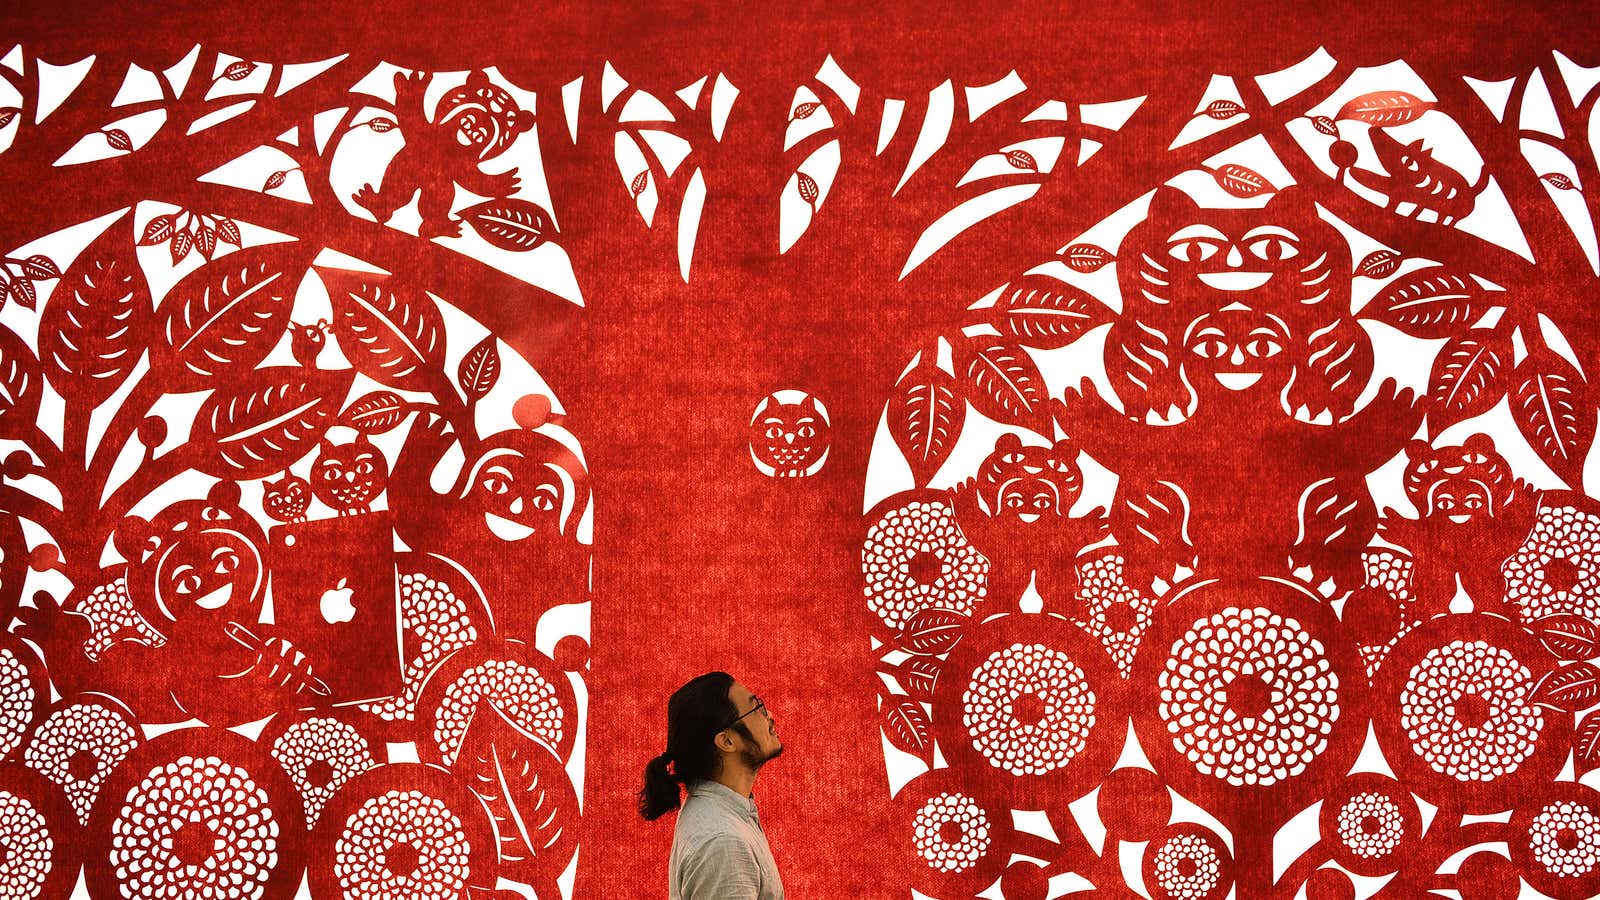 Apple is ringing in its next retail store with a 250-foot artwork painstakingly made with fabric and X-acto knives